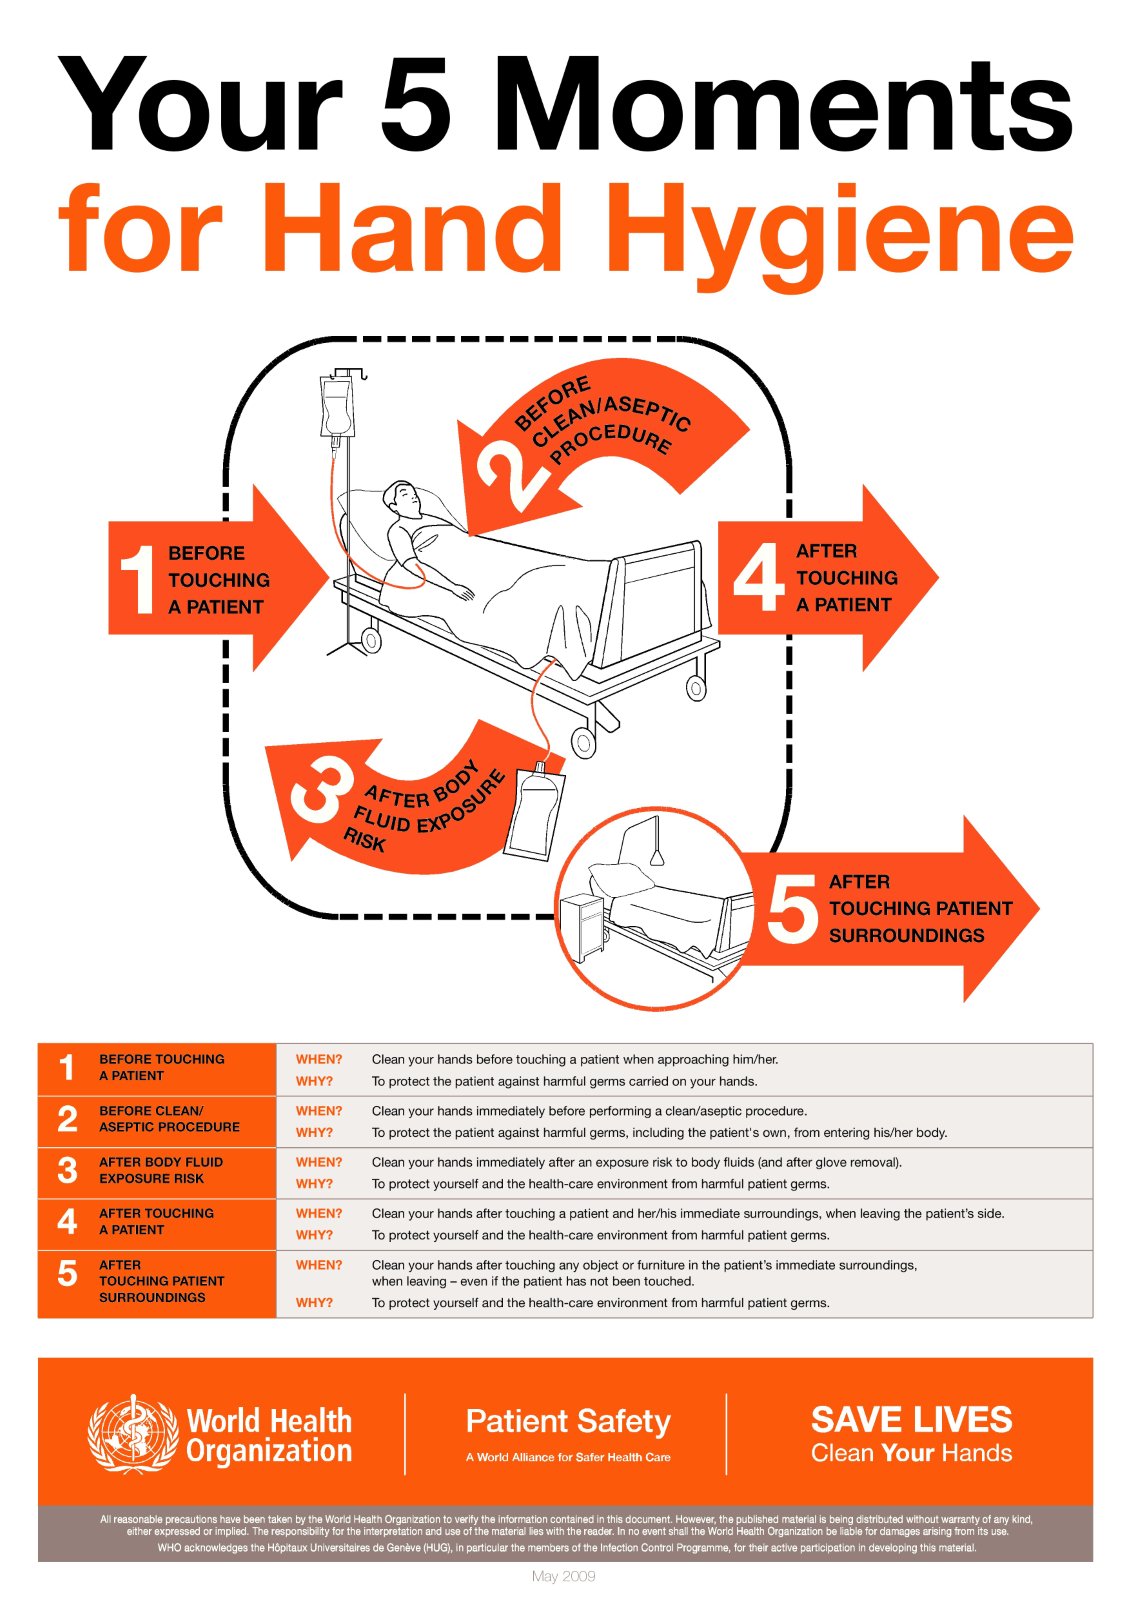 Your 5 moments for hand hygiene